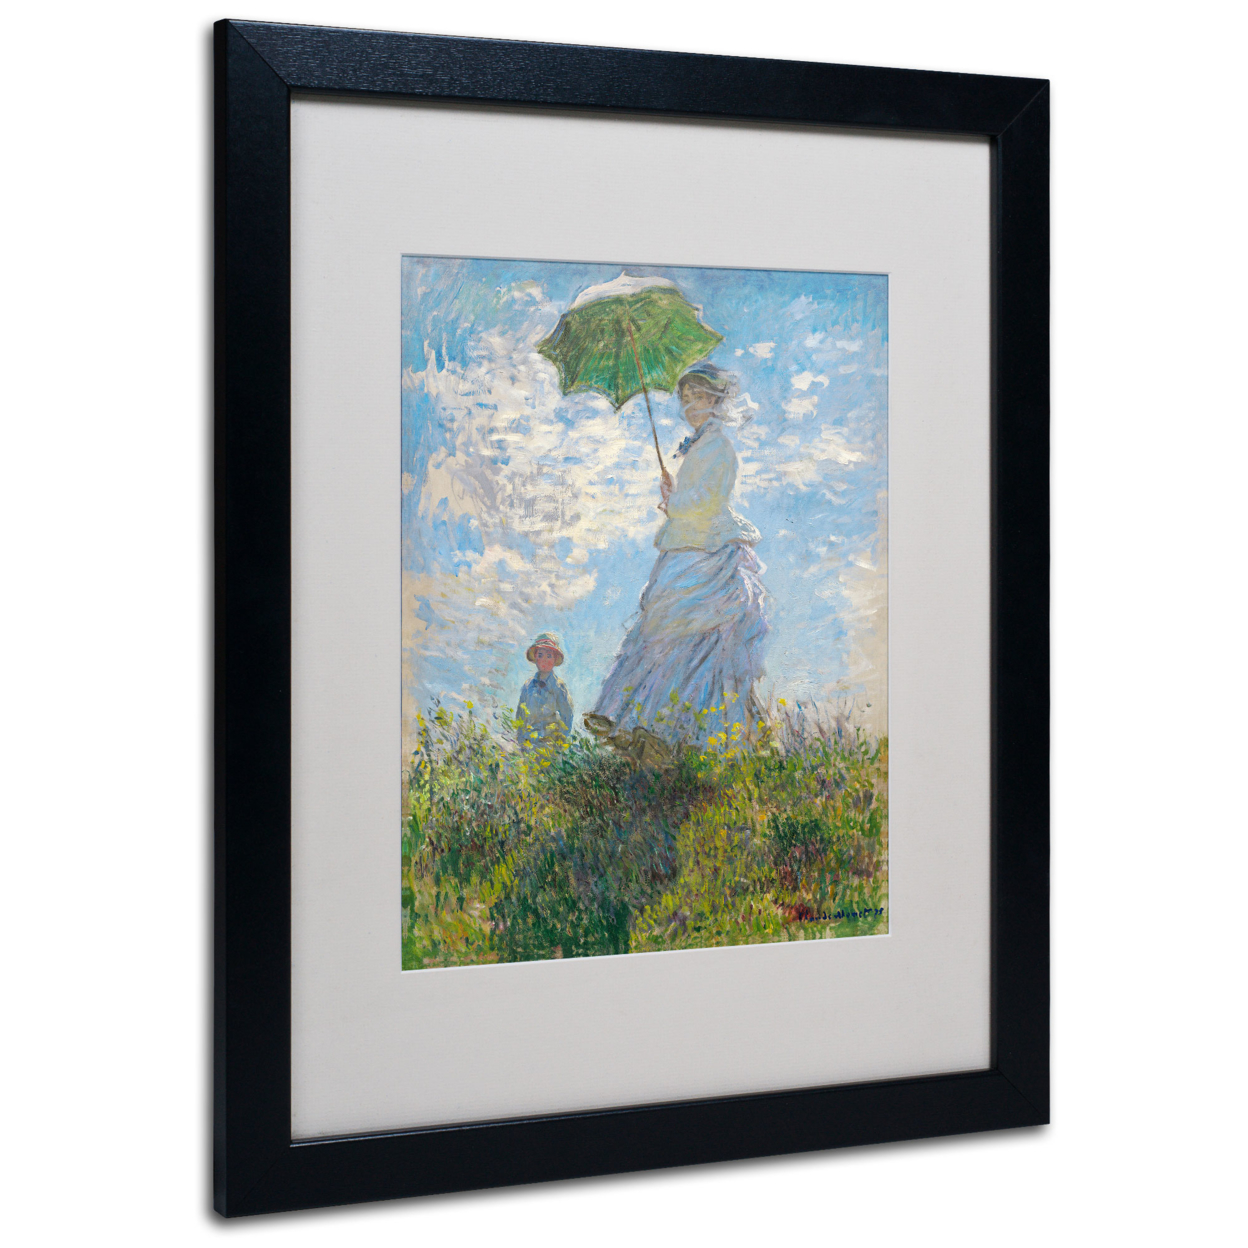 Claude Monet 'Woman With A Parasol 1875' Black Wooden Framed Art 18 X 22 Inches